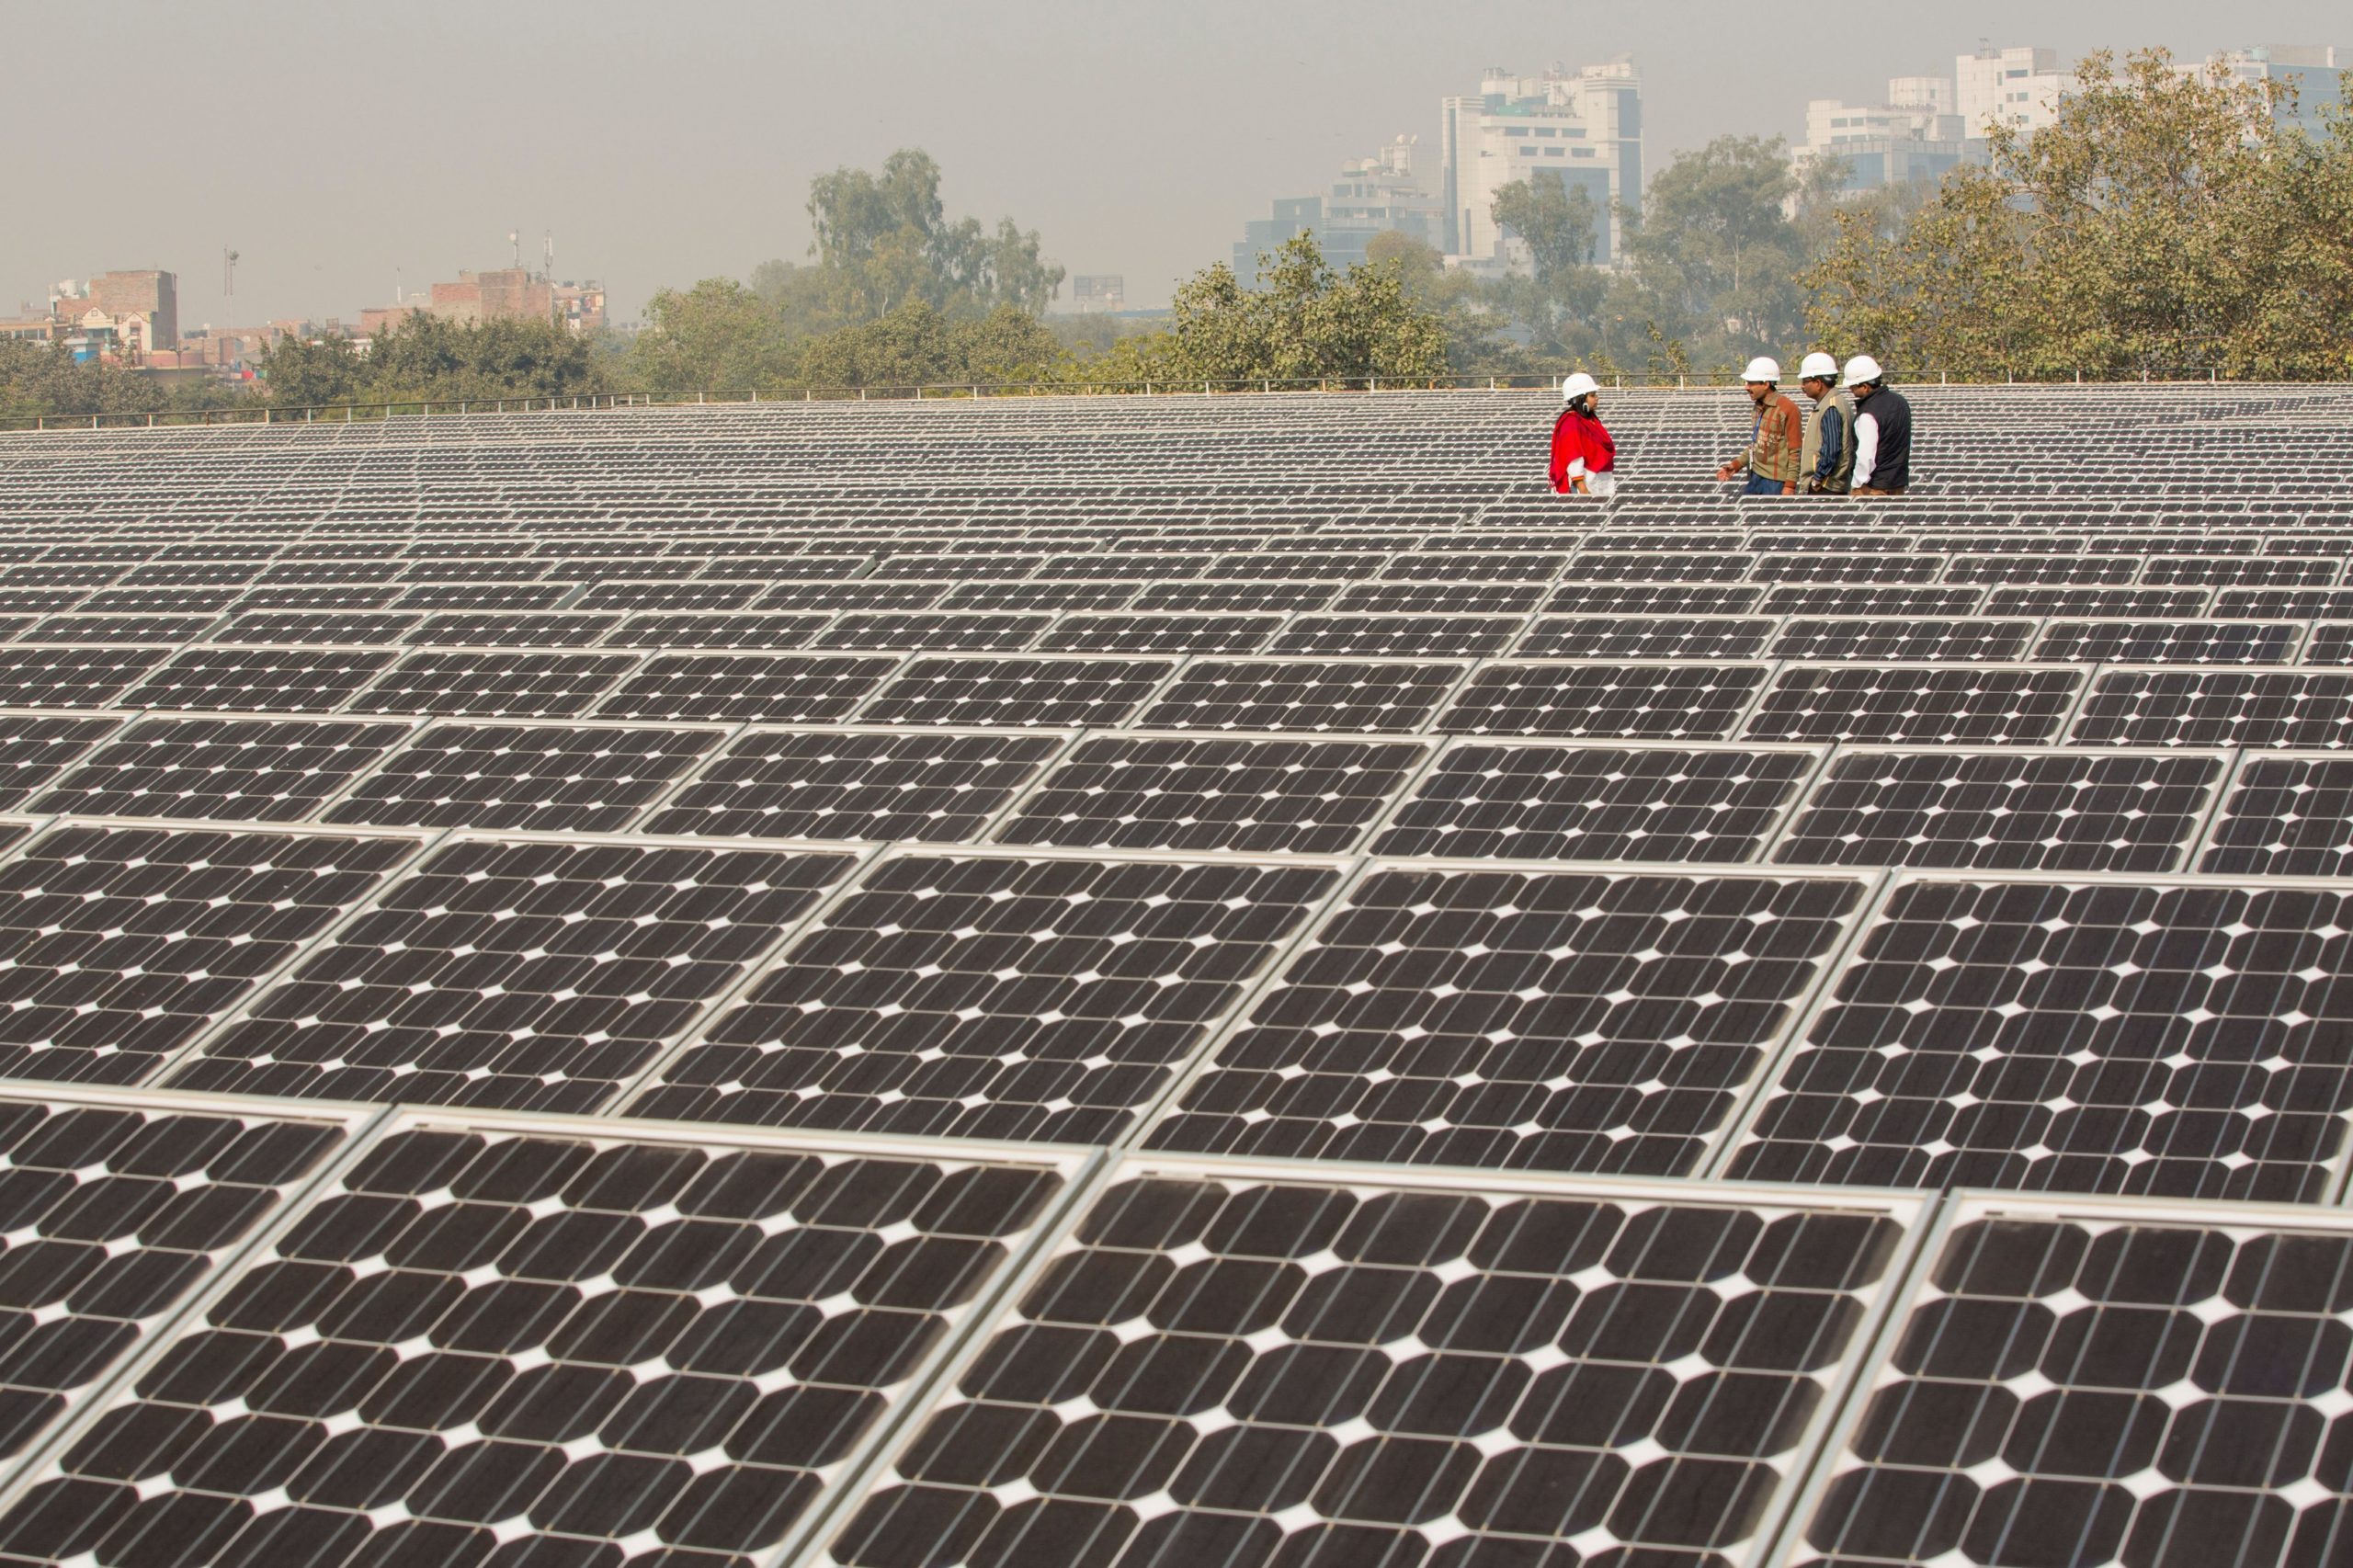 <p>A 1 MW solar power station in Delhi, India. Solar will be an essential part of India’s plans to implement the net zero by 2070 target. (Image: Alamy)</p>